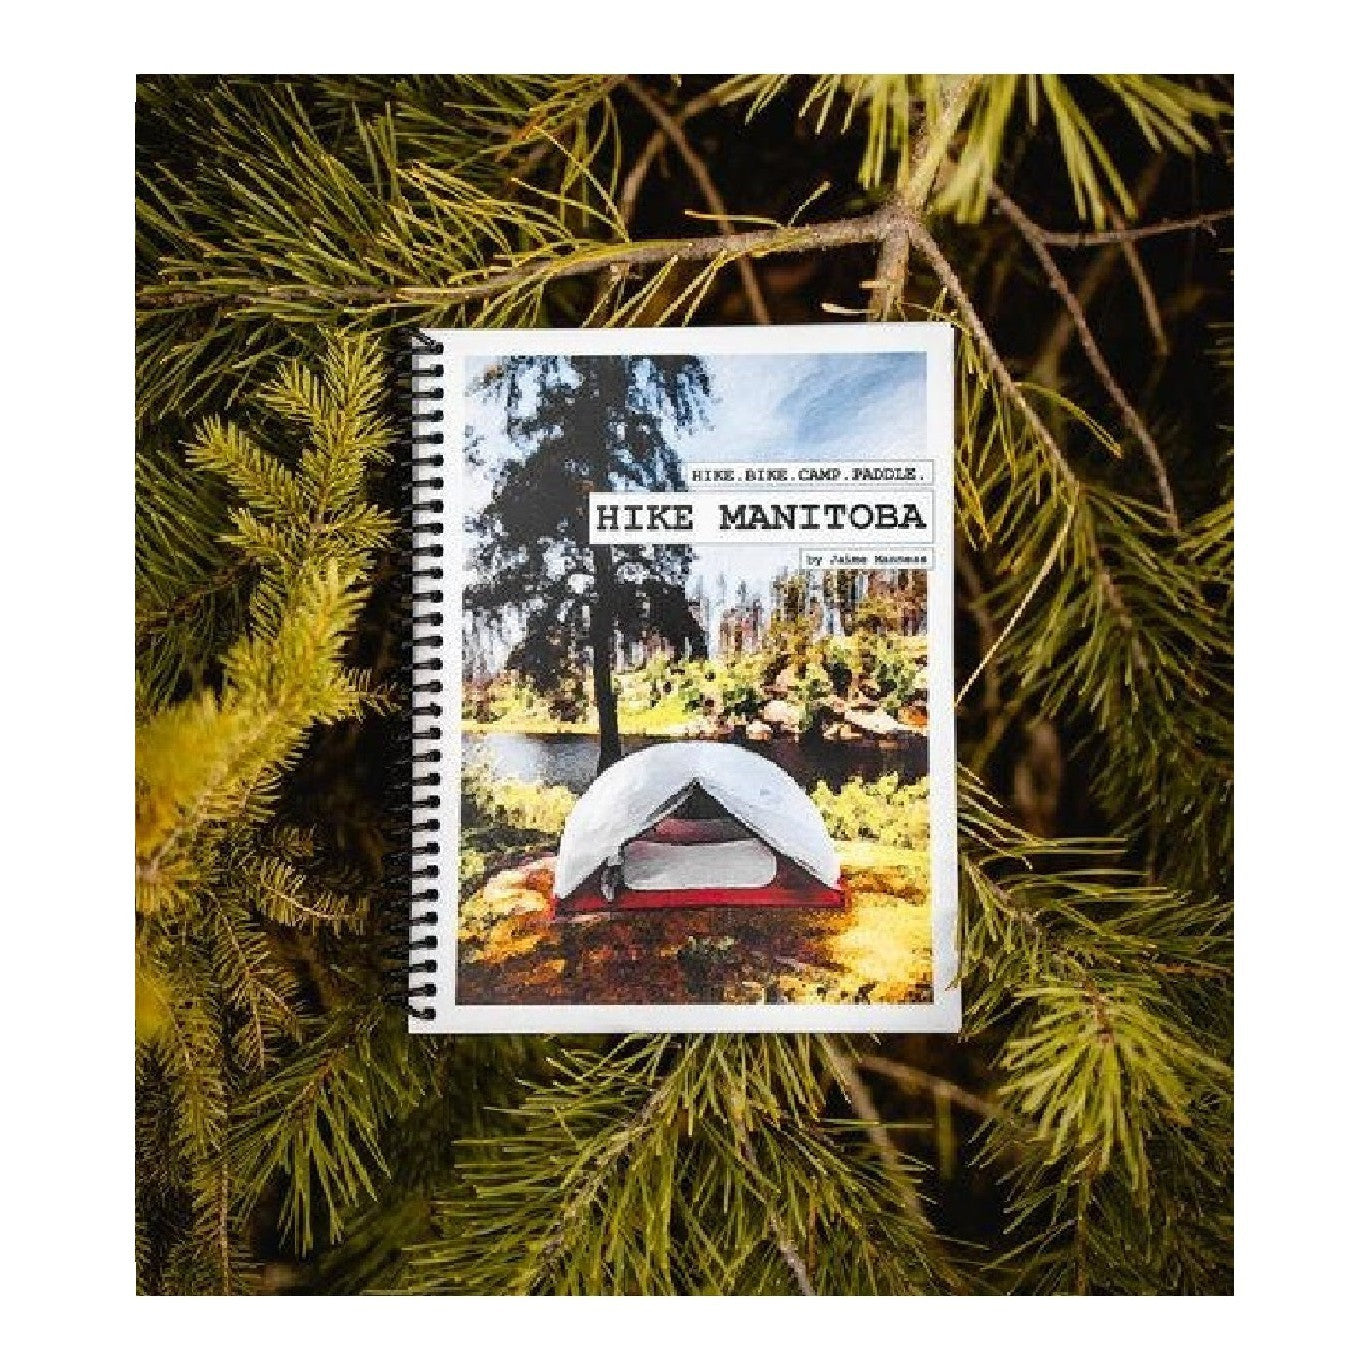 Image showing cover of book featuring a small tent in the woods. - See All Bike Accessories products